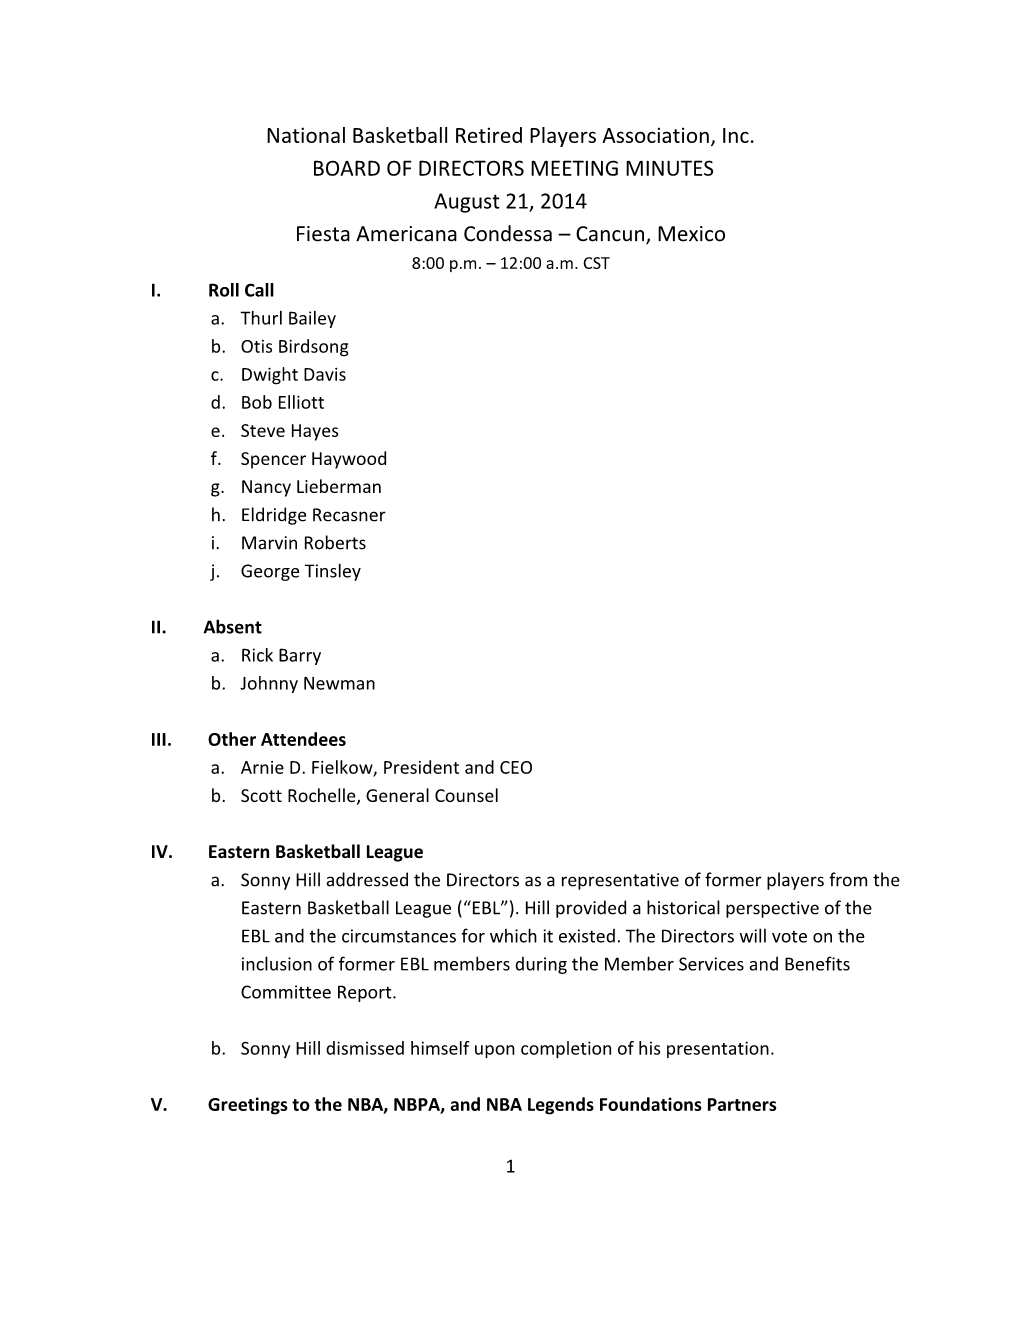 National Basketball Retired Players Association, Inc. BOARD of DIRECTORS MEETING MINUTES August 21, 2014 Fiesta Americana Condessa – Cancun, Mexico 8:00 P.M